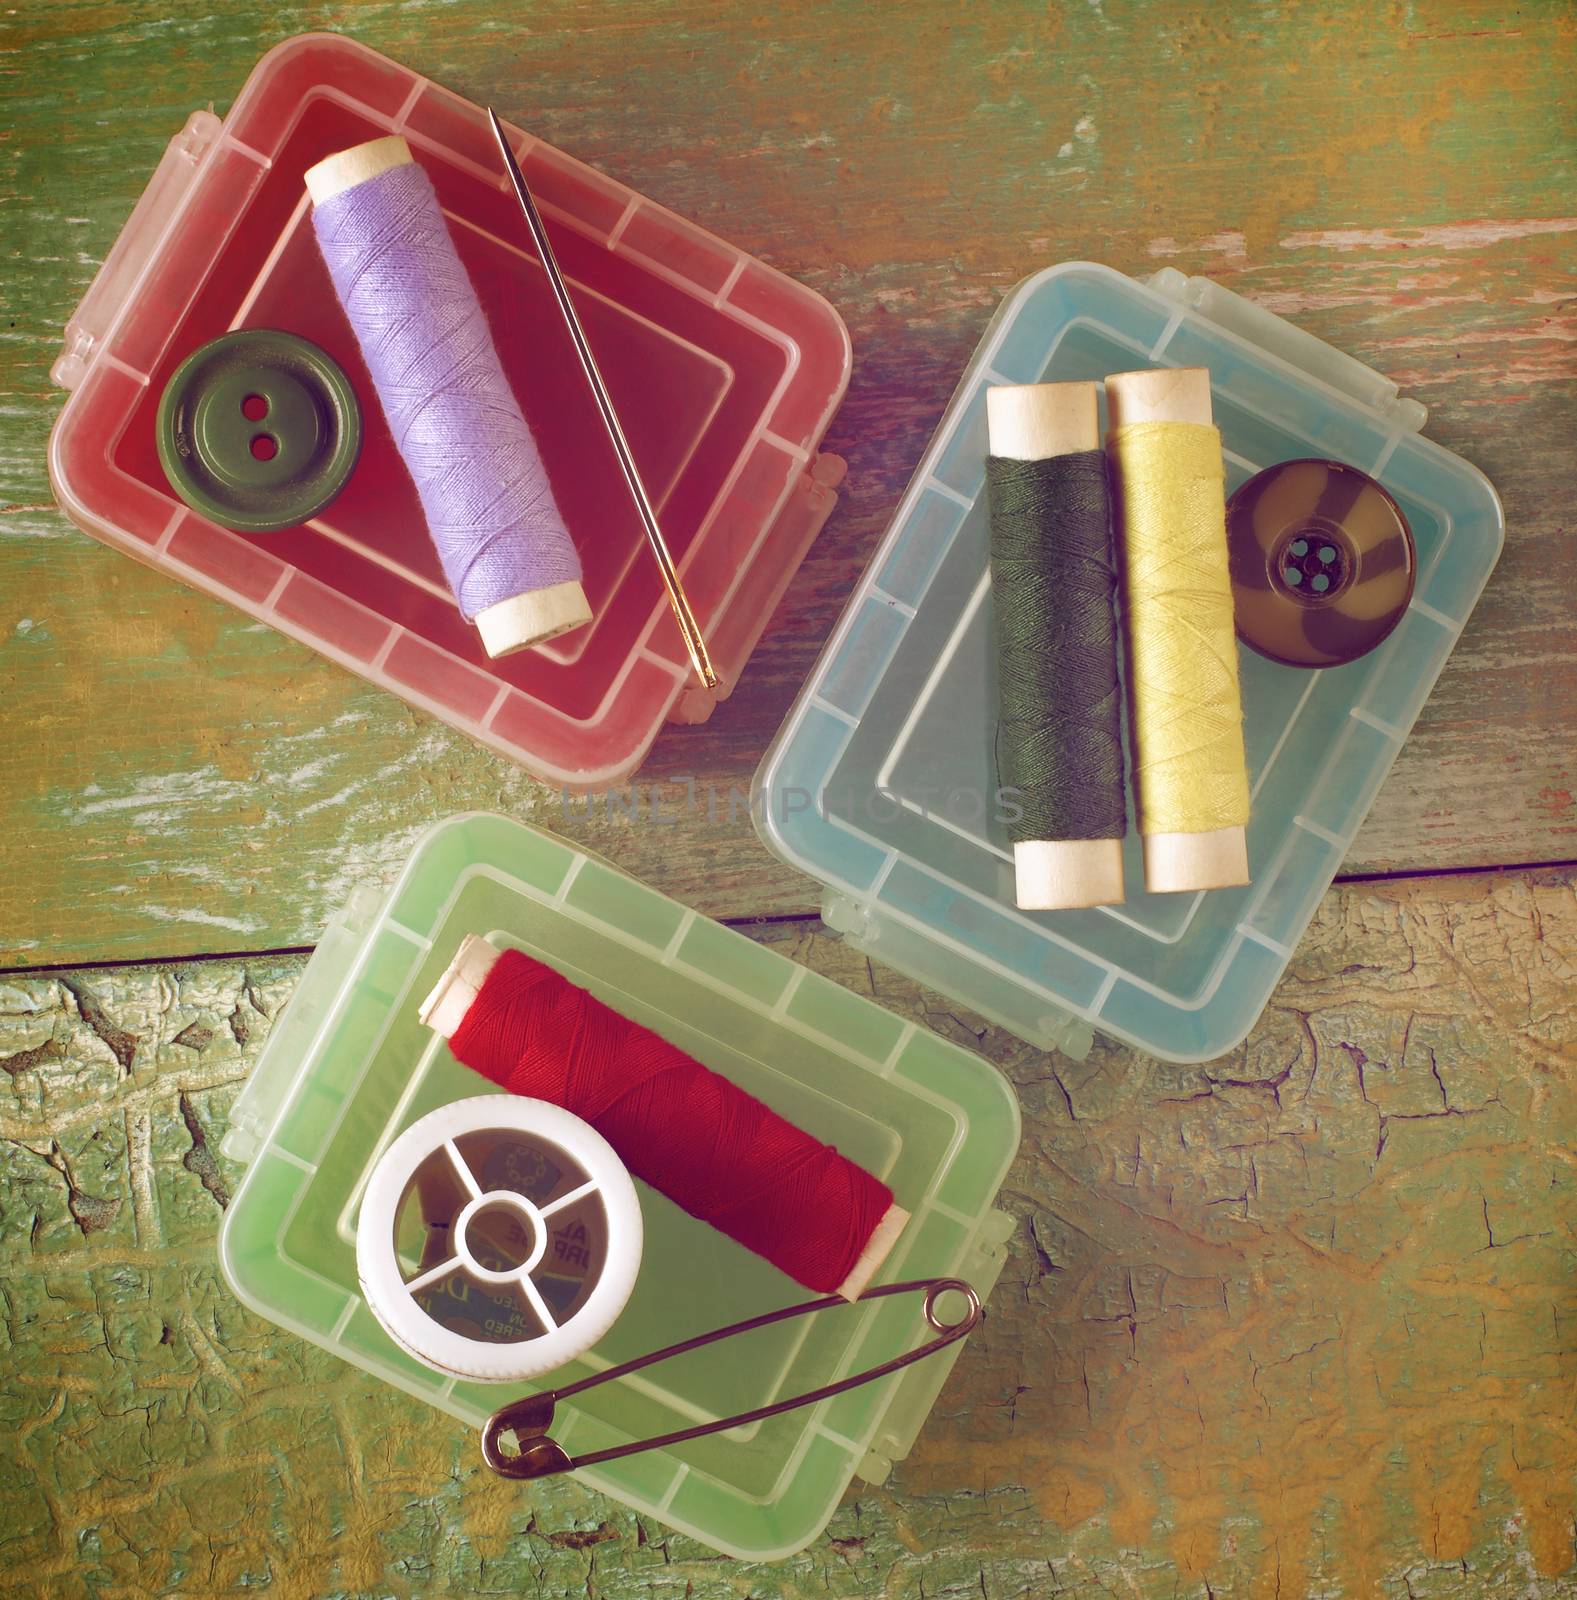 Arrangement of Plastic Sewing Boxes, Pins, Needles and Thread Spools closeup on Cracked Wooden background. Retro Styled